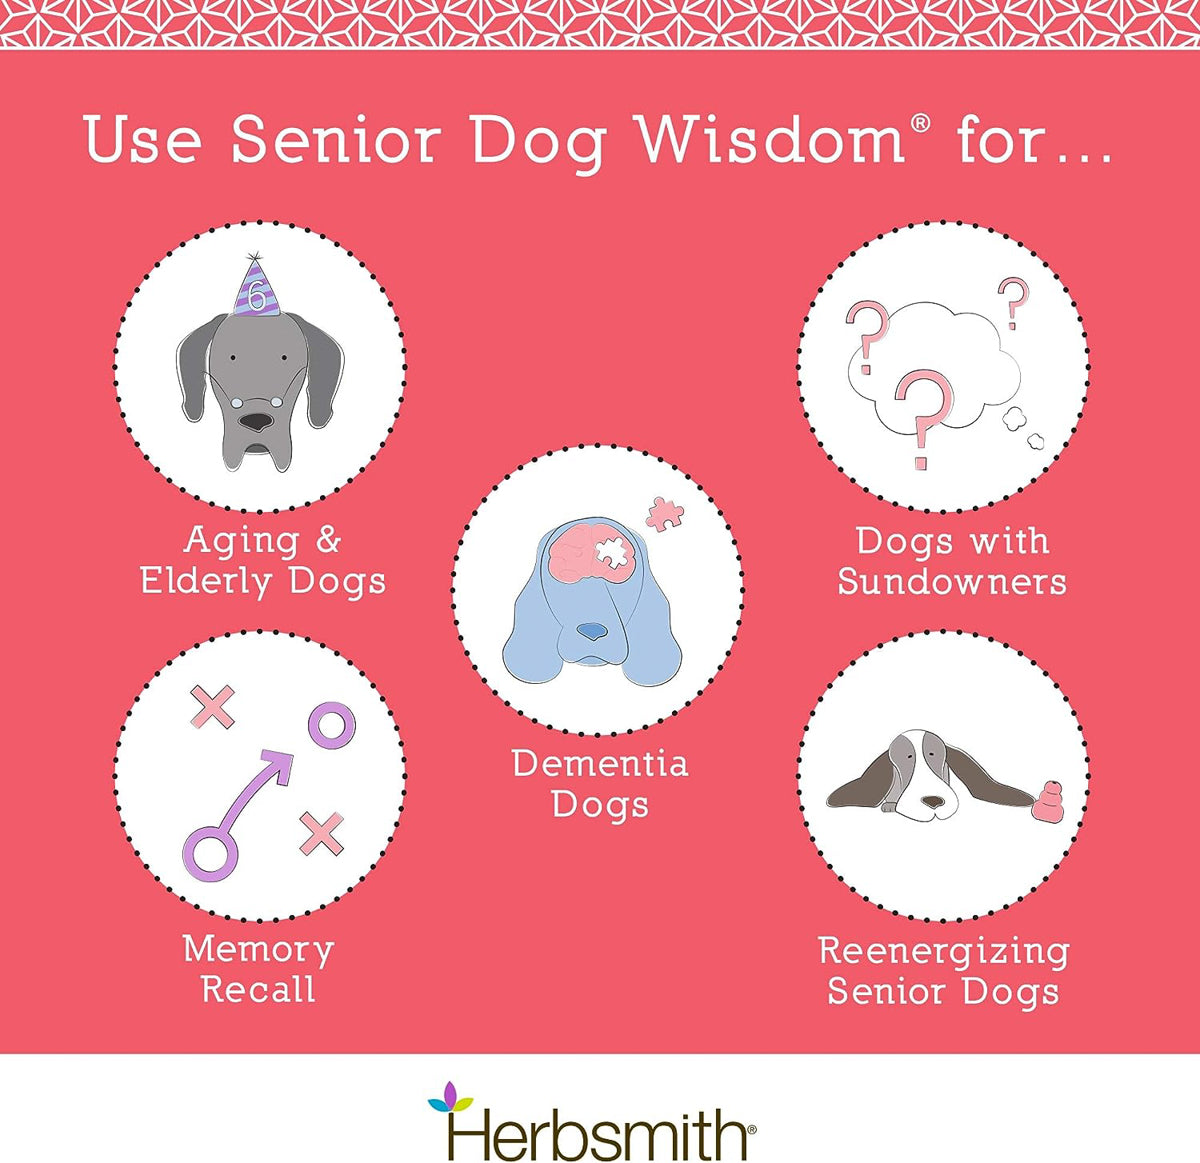 infographic showing the benefits and use of Senior Dog Wisdom Cognitive Support 